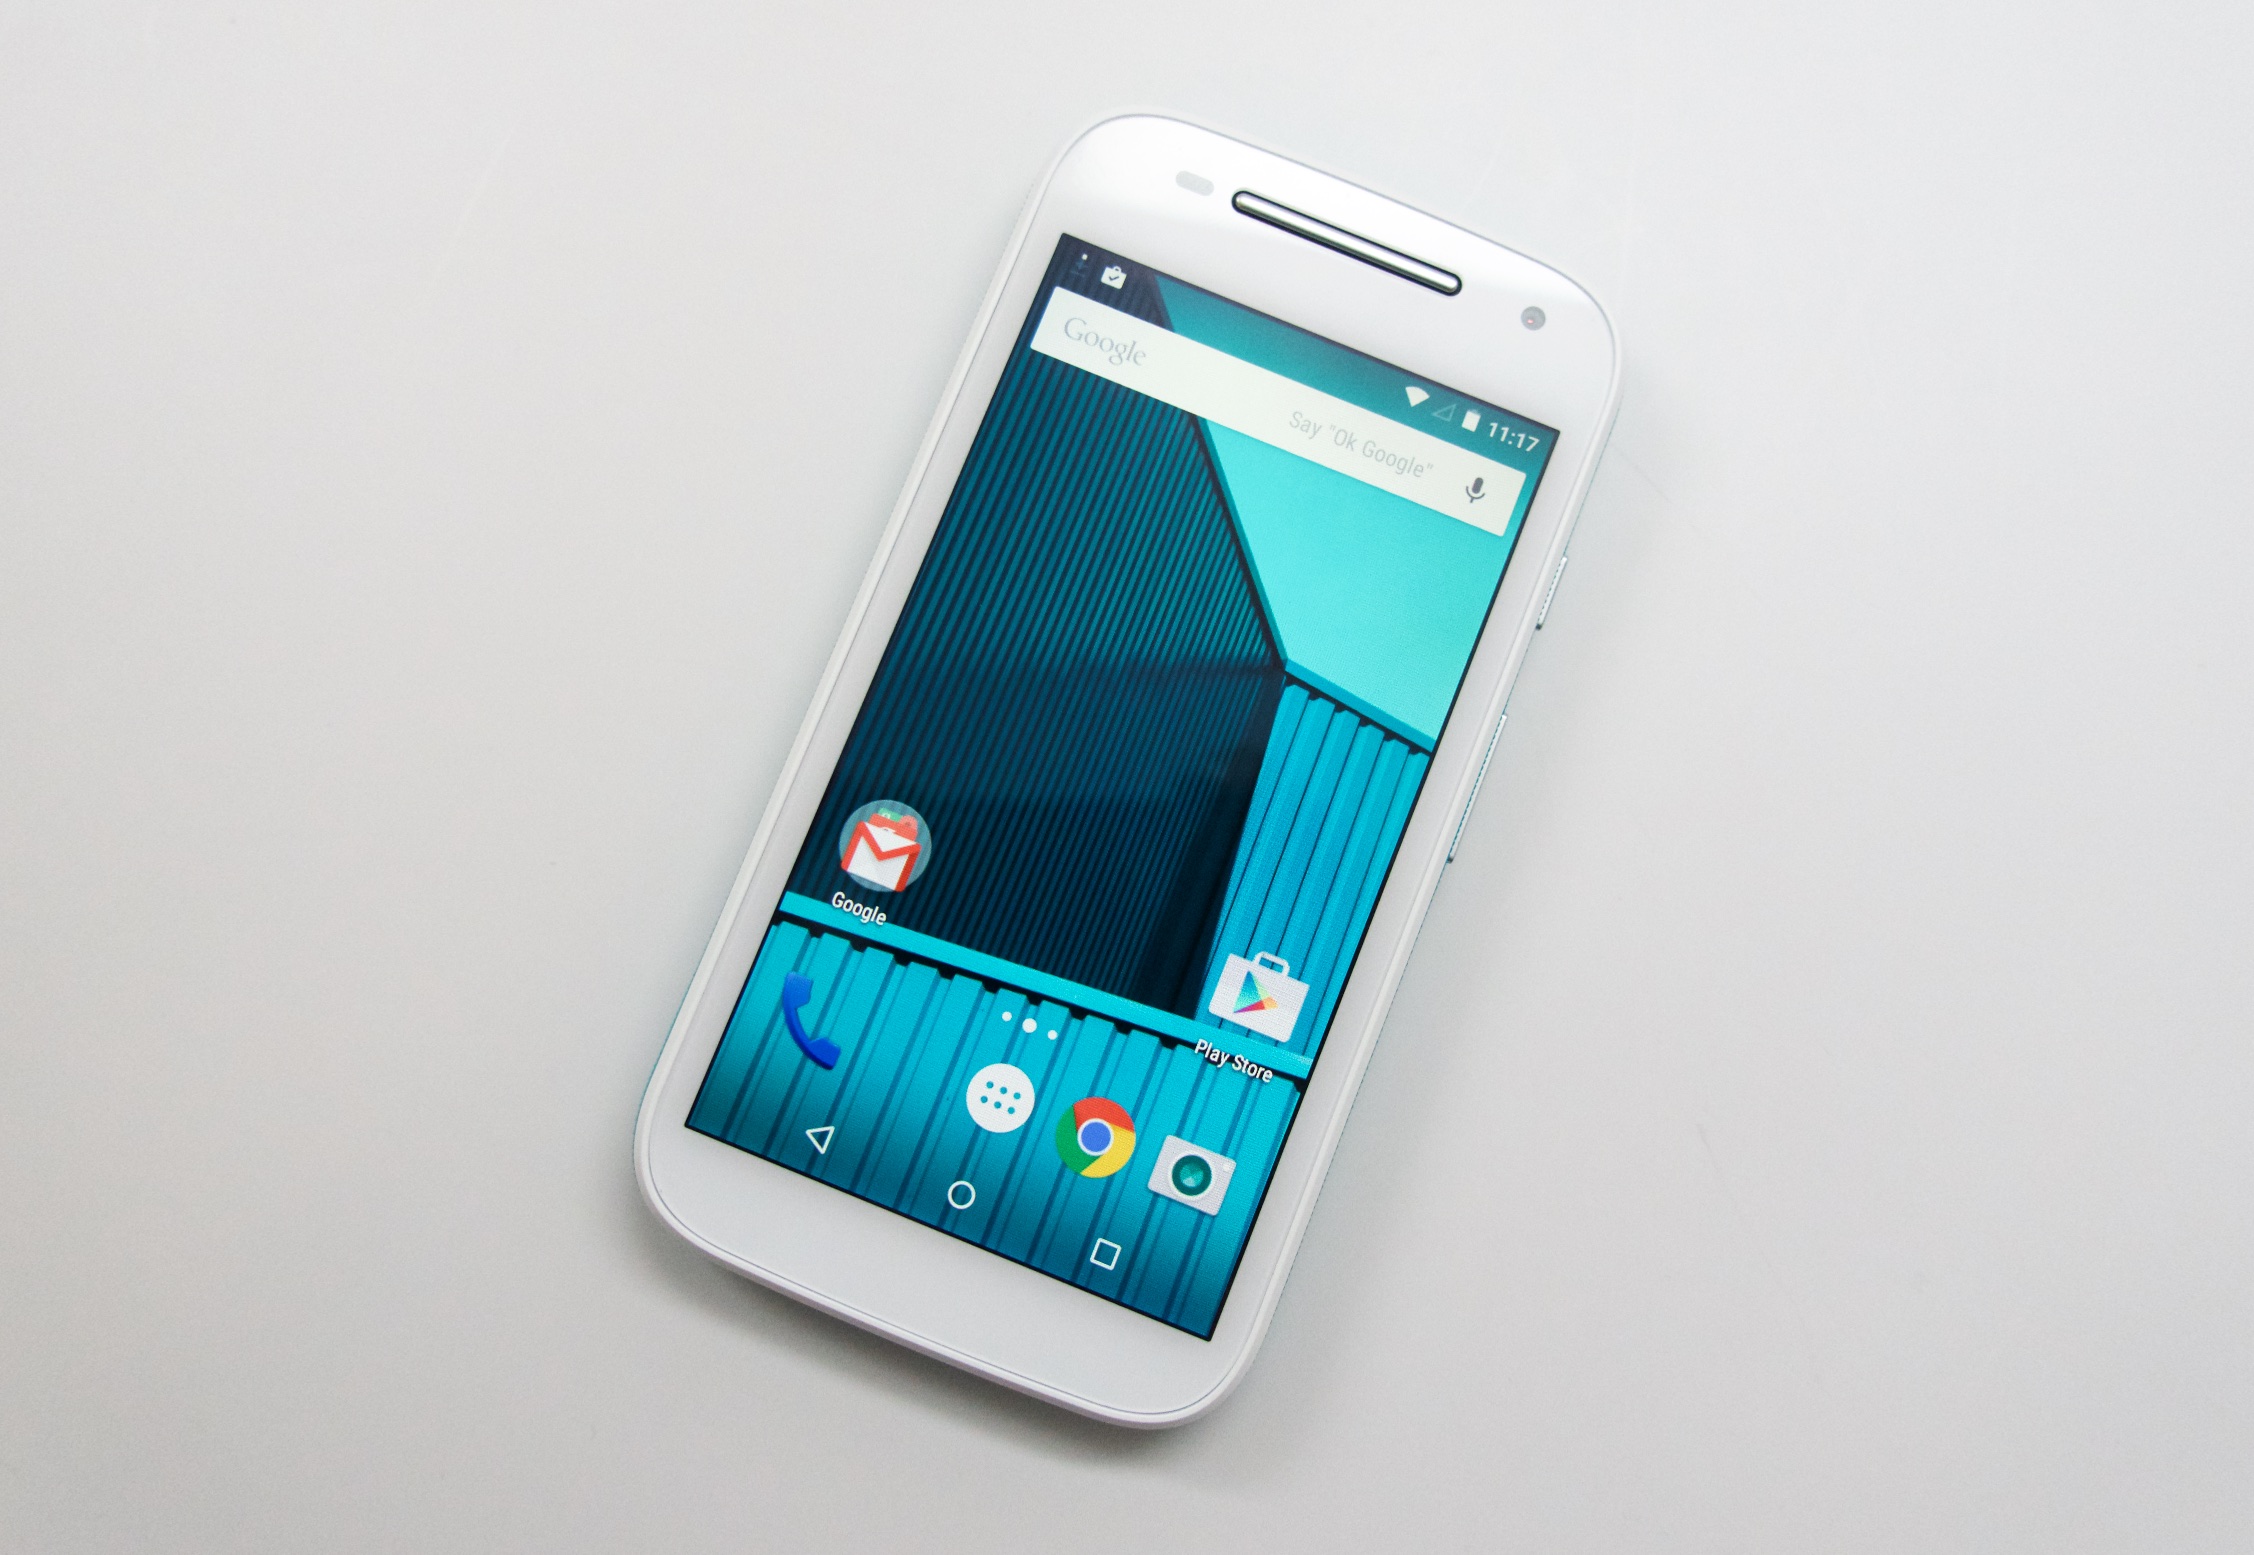 The Moto E 2nd Gen display is bigger, but could use a resolution upgrade.